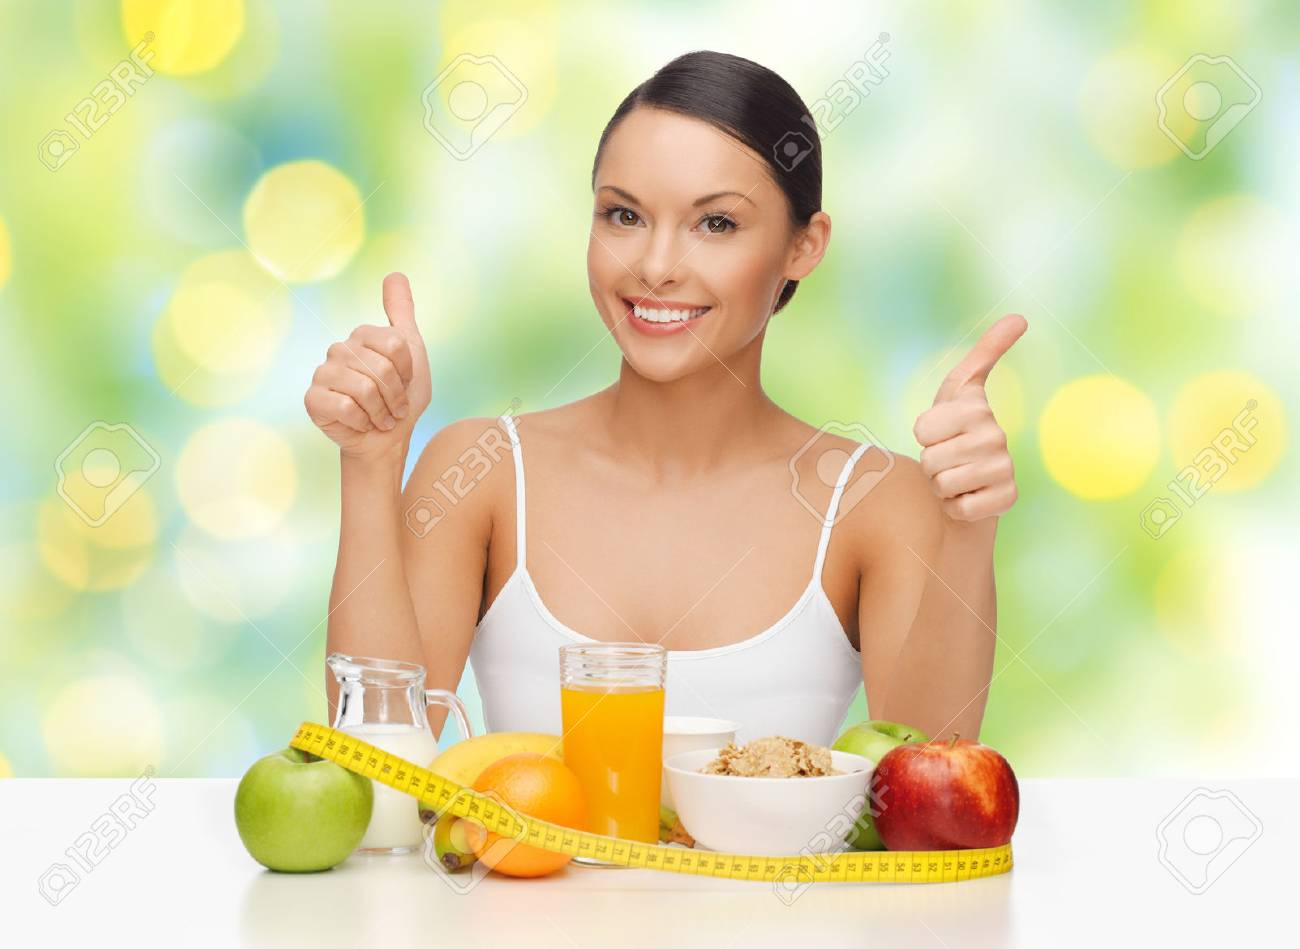 Healthy lifestyle tips for adults